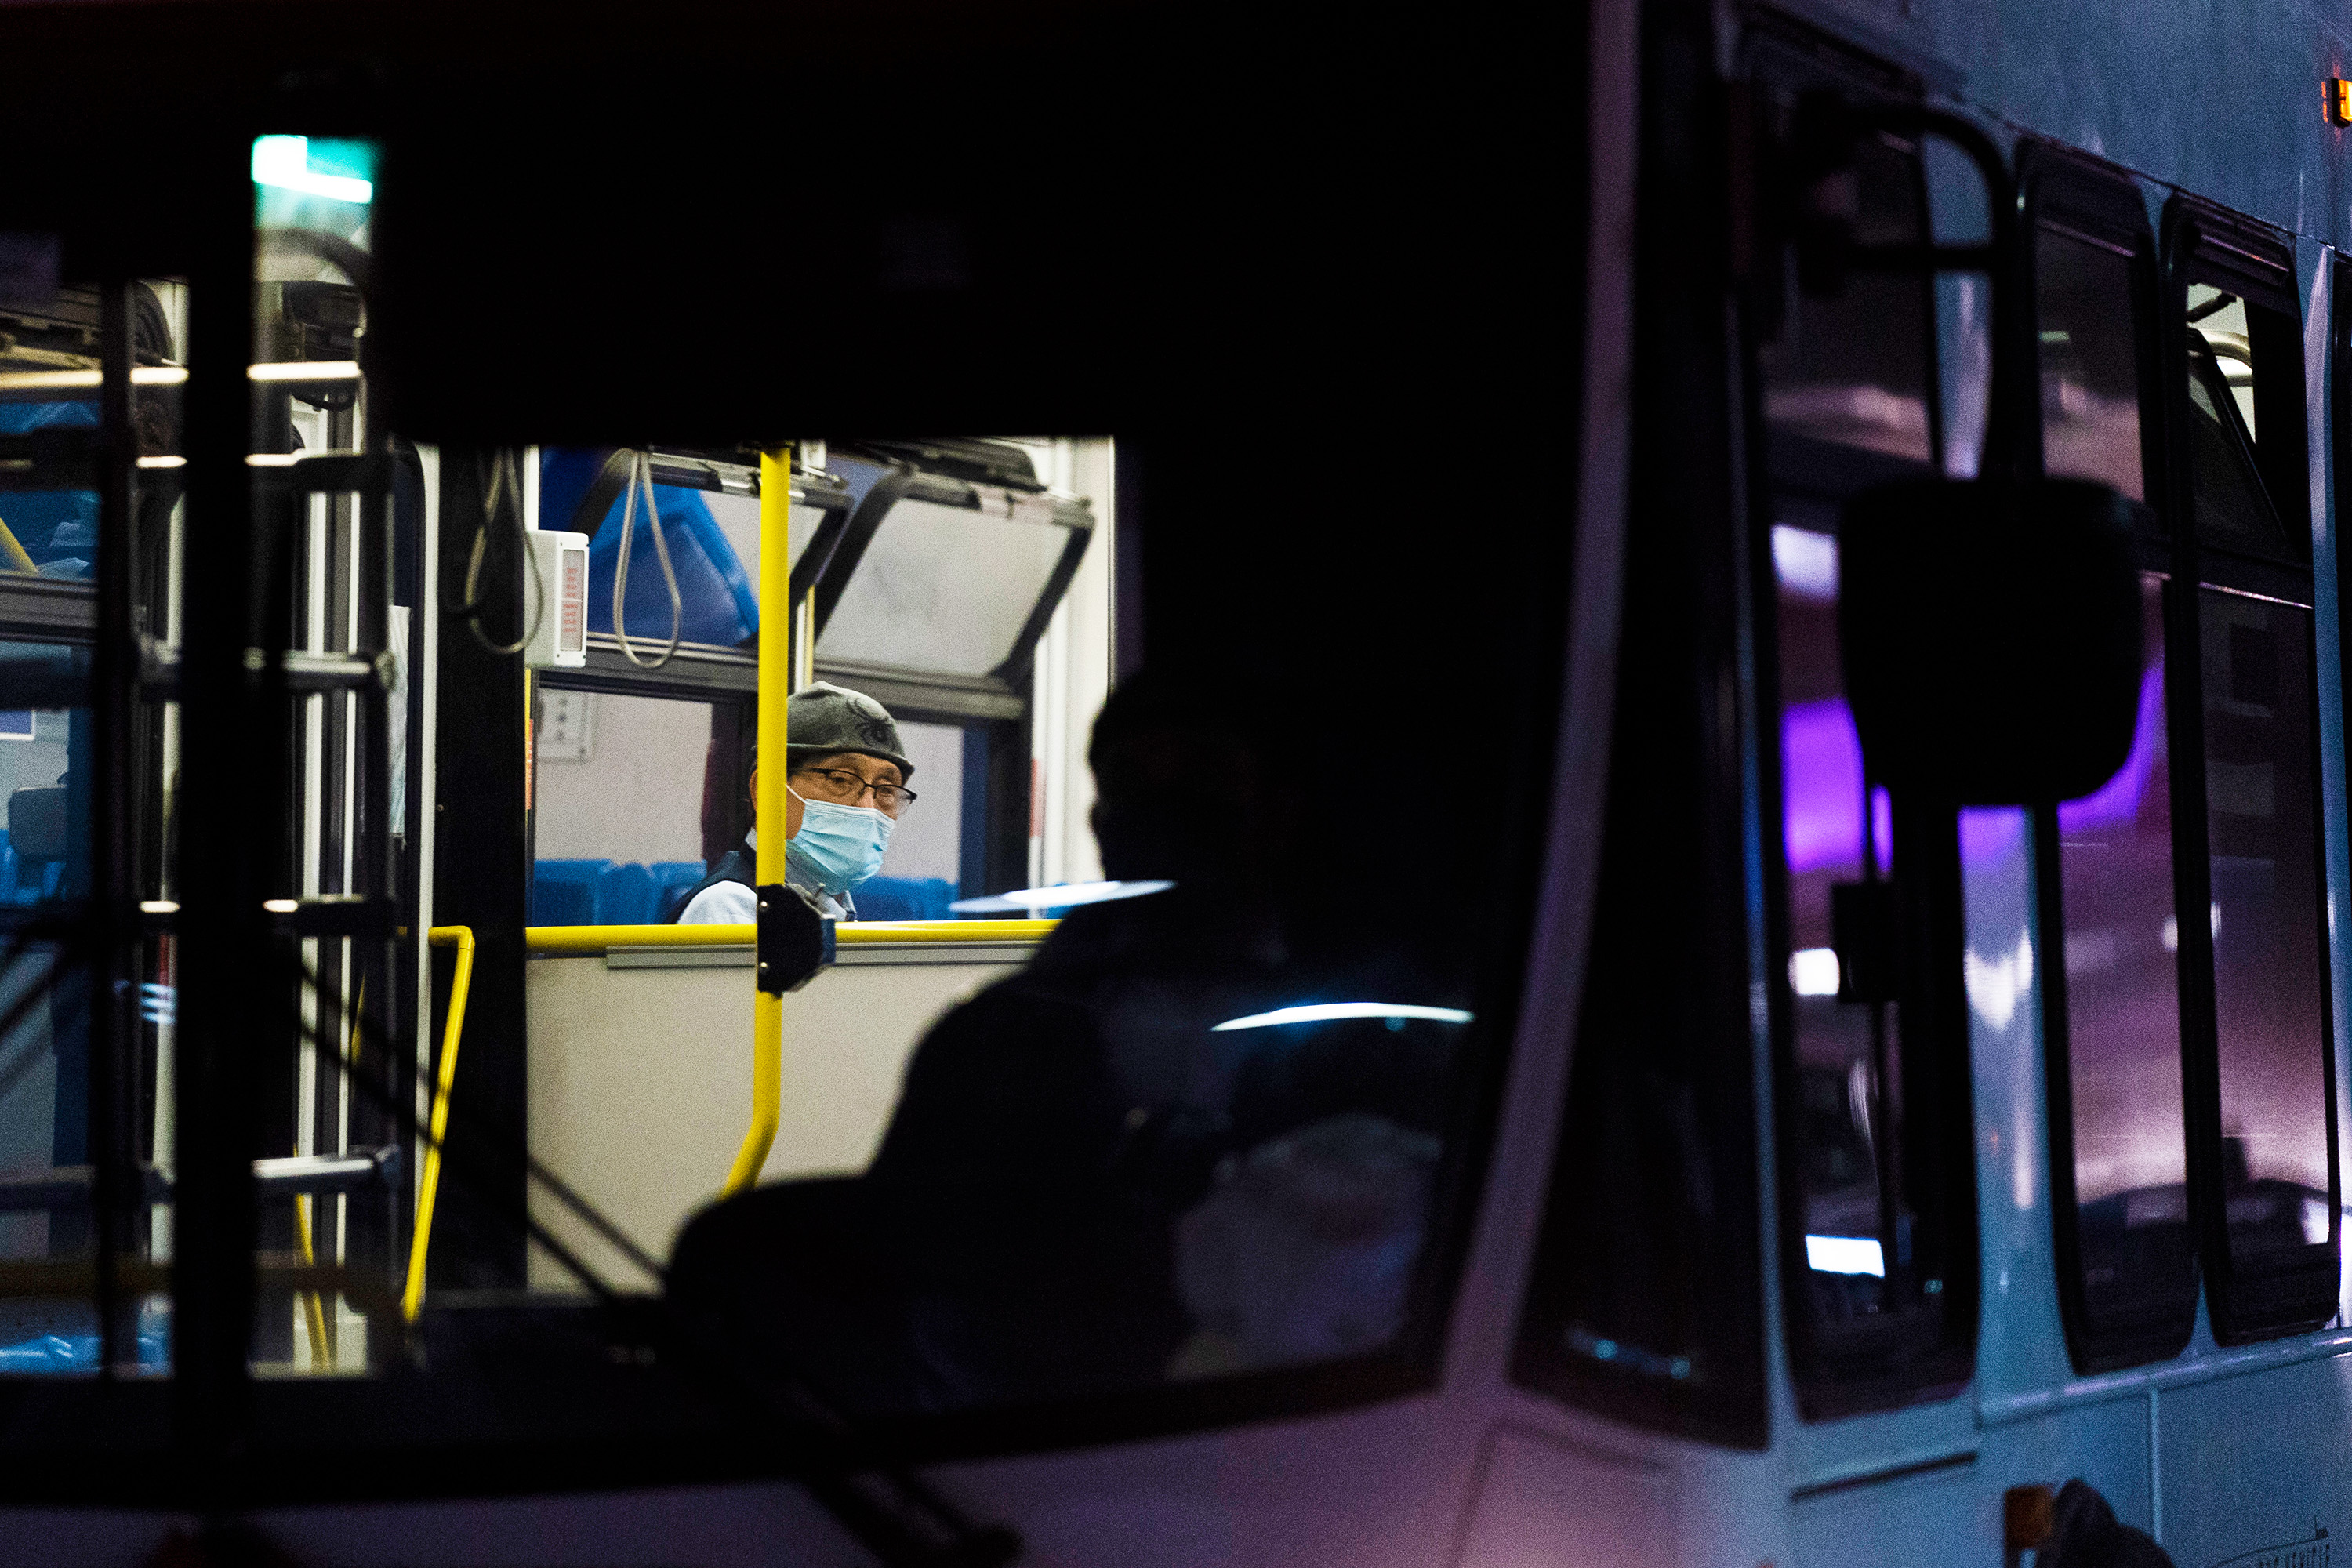 A traveler wearing a protective face mask sits in a shuttle bus at the Los Angeles International Airport